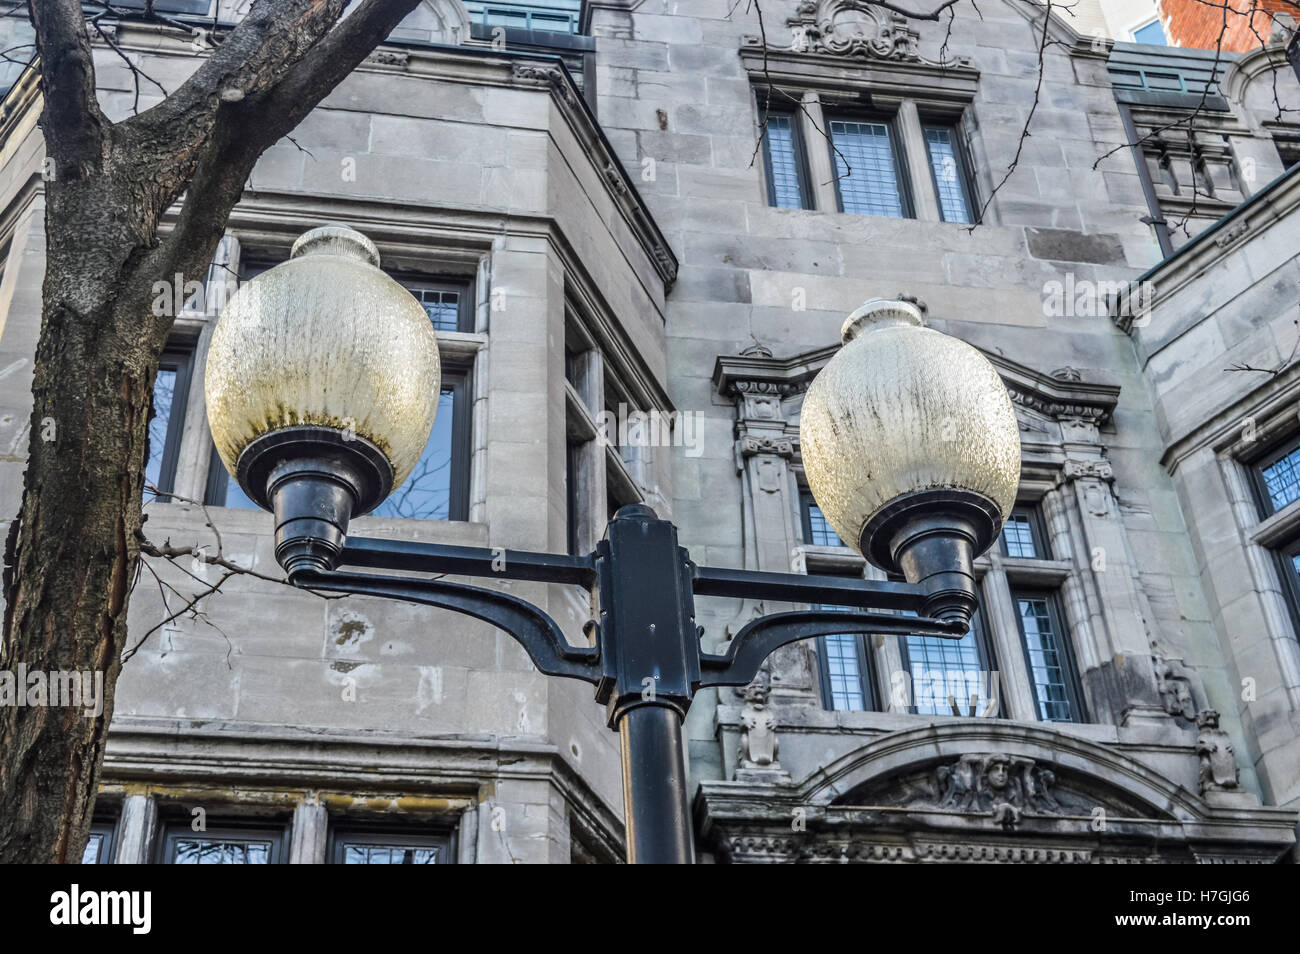 Lamp post in the old city, Montreal Stock Photo